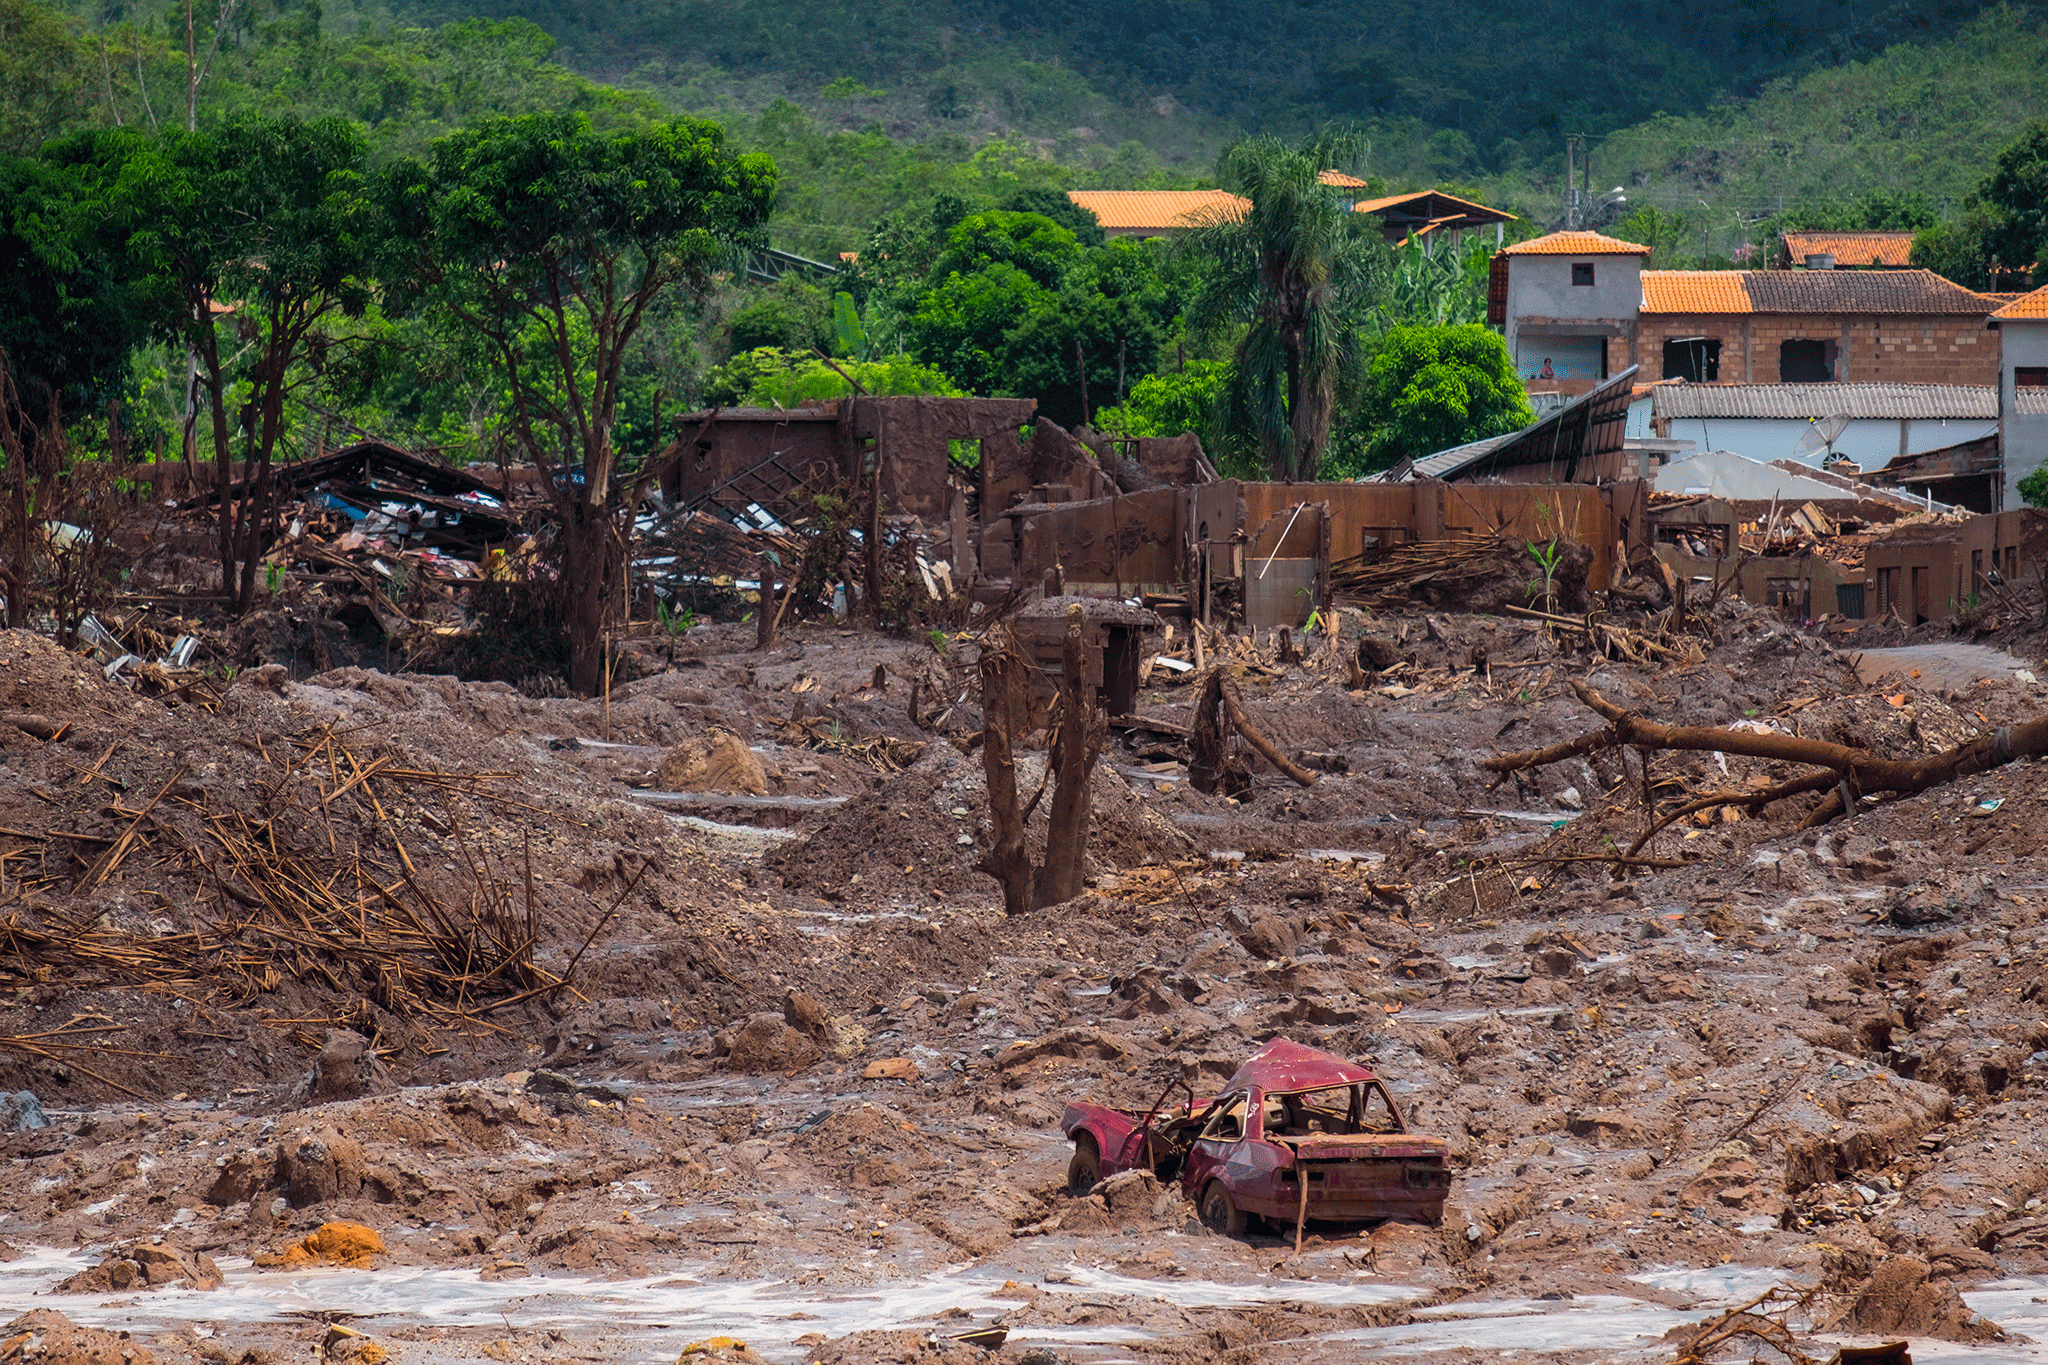  Mariana, Brazil-December 17 2015. View of Bento Rodrigues district destroyed due to the mud tsunami after the collapse of Samarco's Fundao mining dam